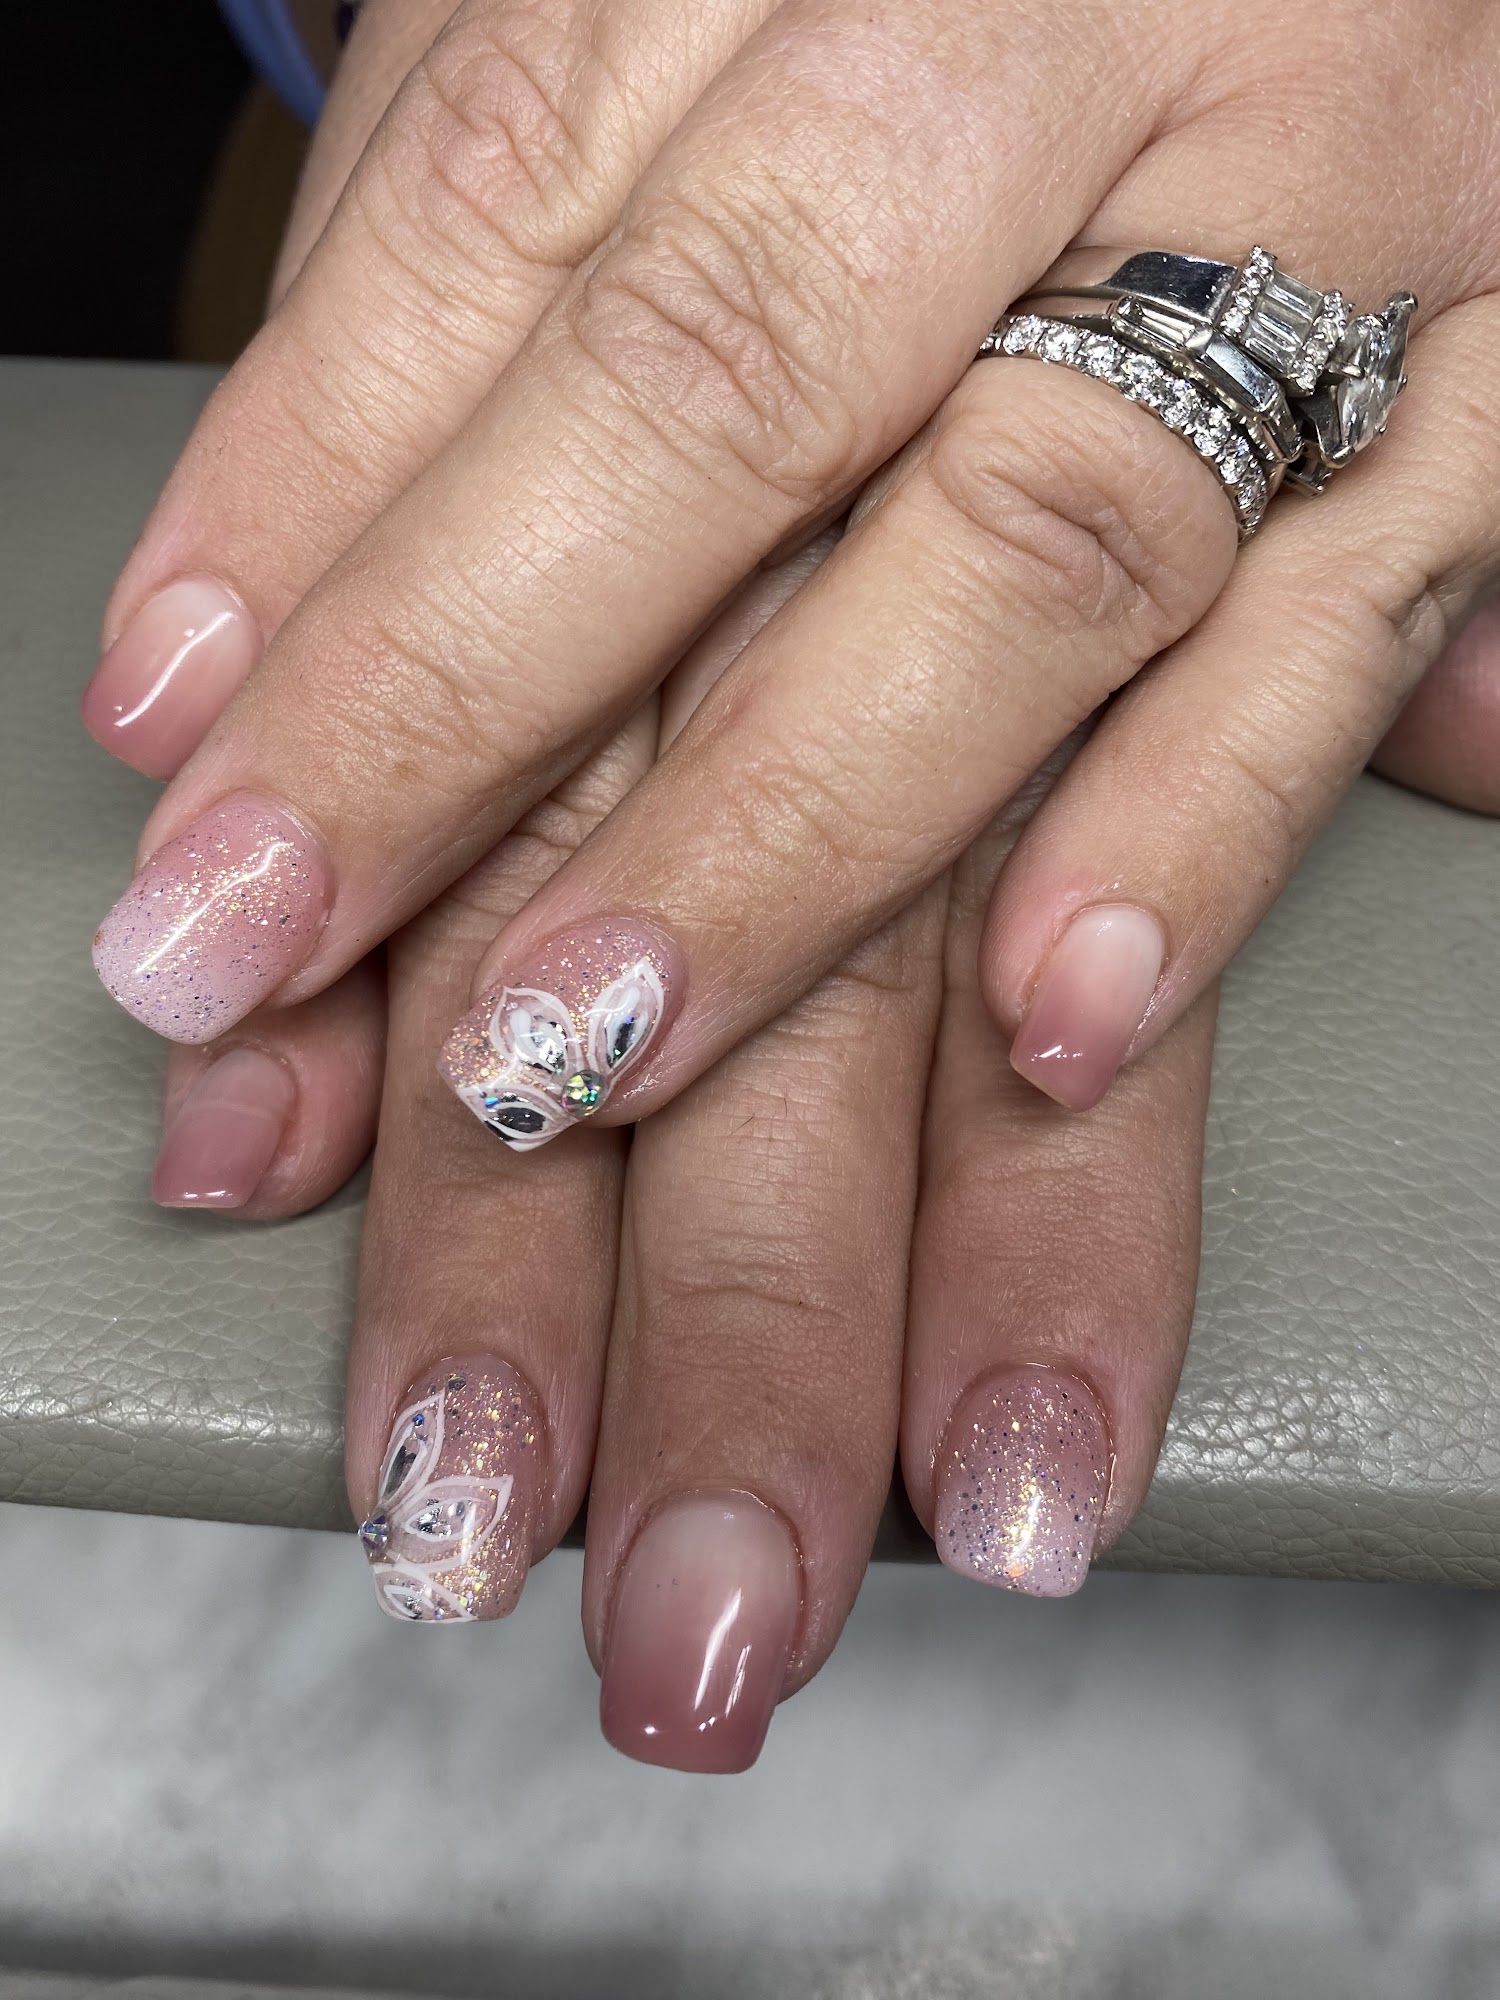 Super Touch Beauty Nails 238 S Main St, Manville New Jersey 08835